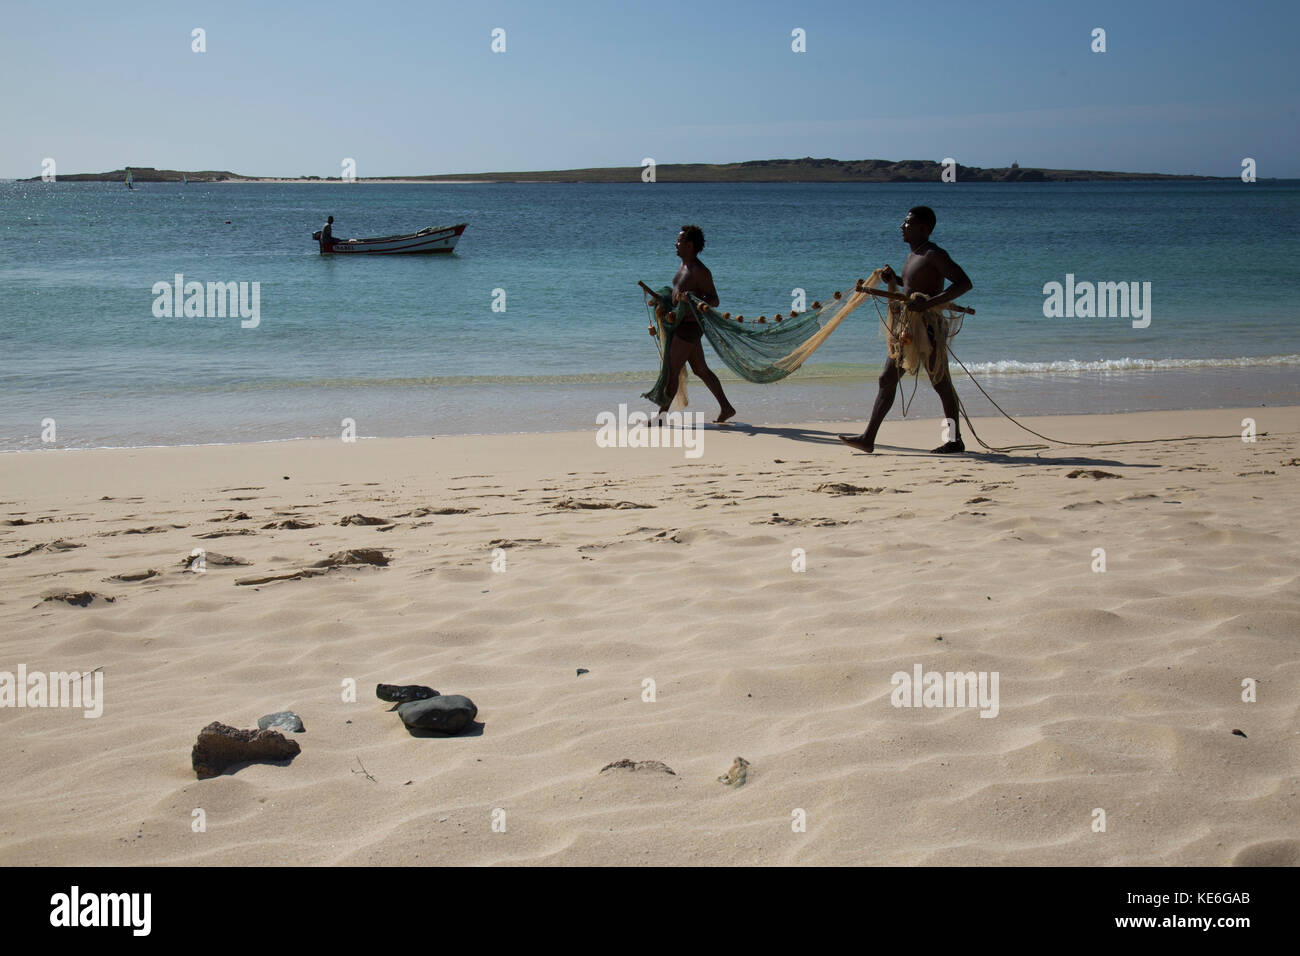 Two fishermen walking on a beach in Cape Verde island holding a fishing net  with a small fishing boat in the background Stock Photo - Alamy